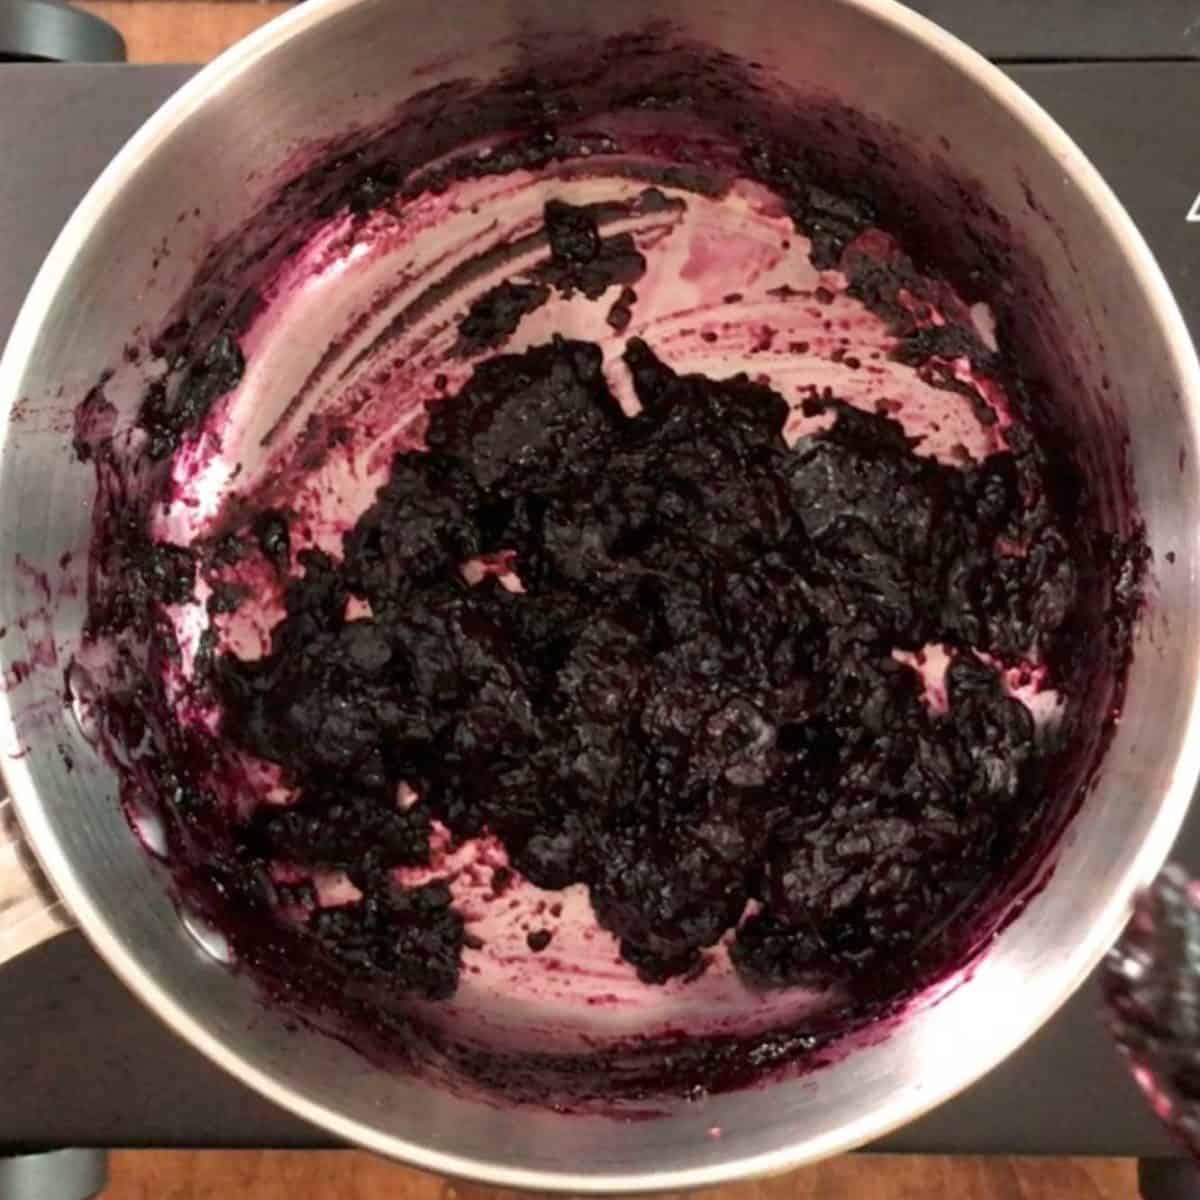 blueberry jam thickening up in a small saucepan.